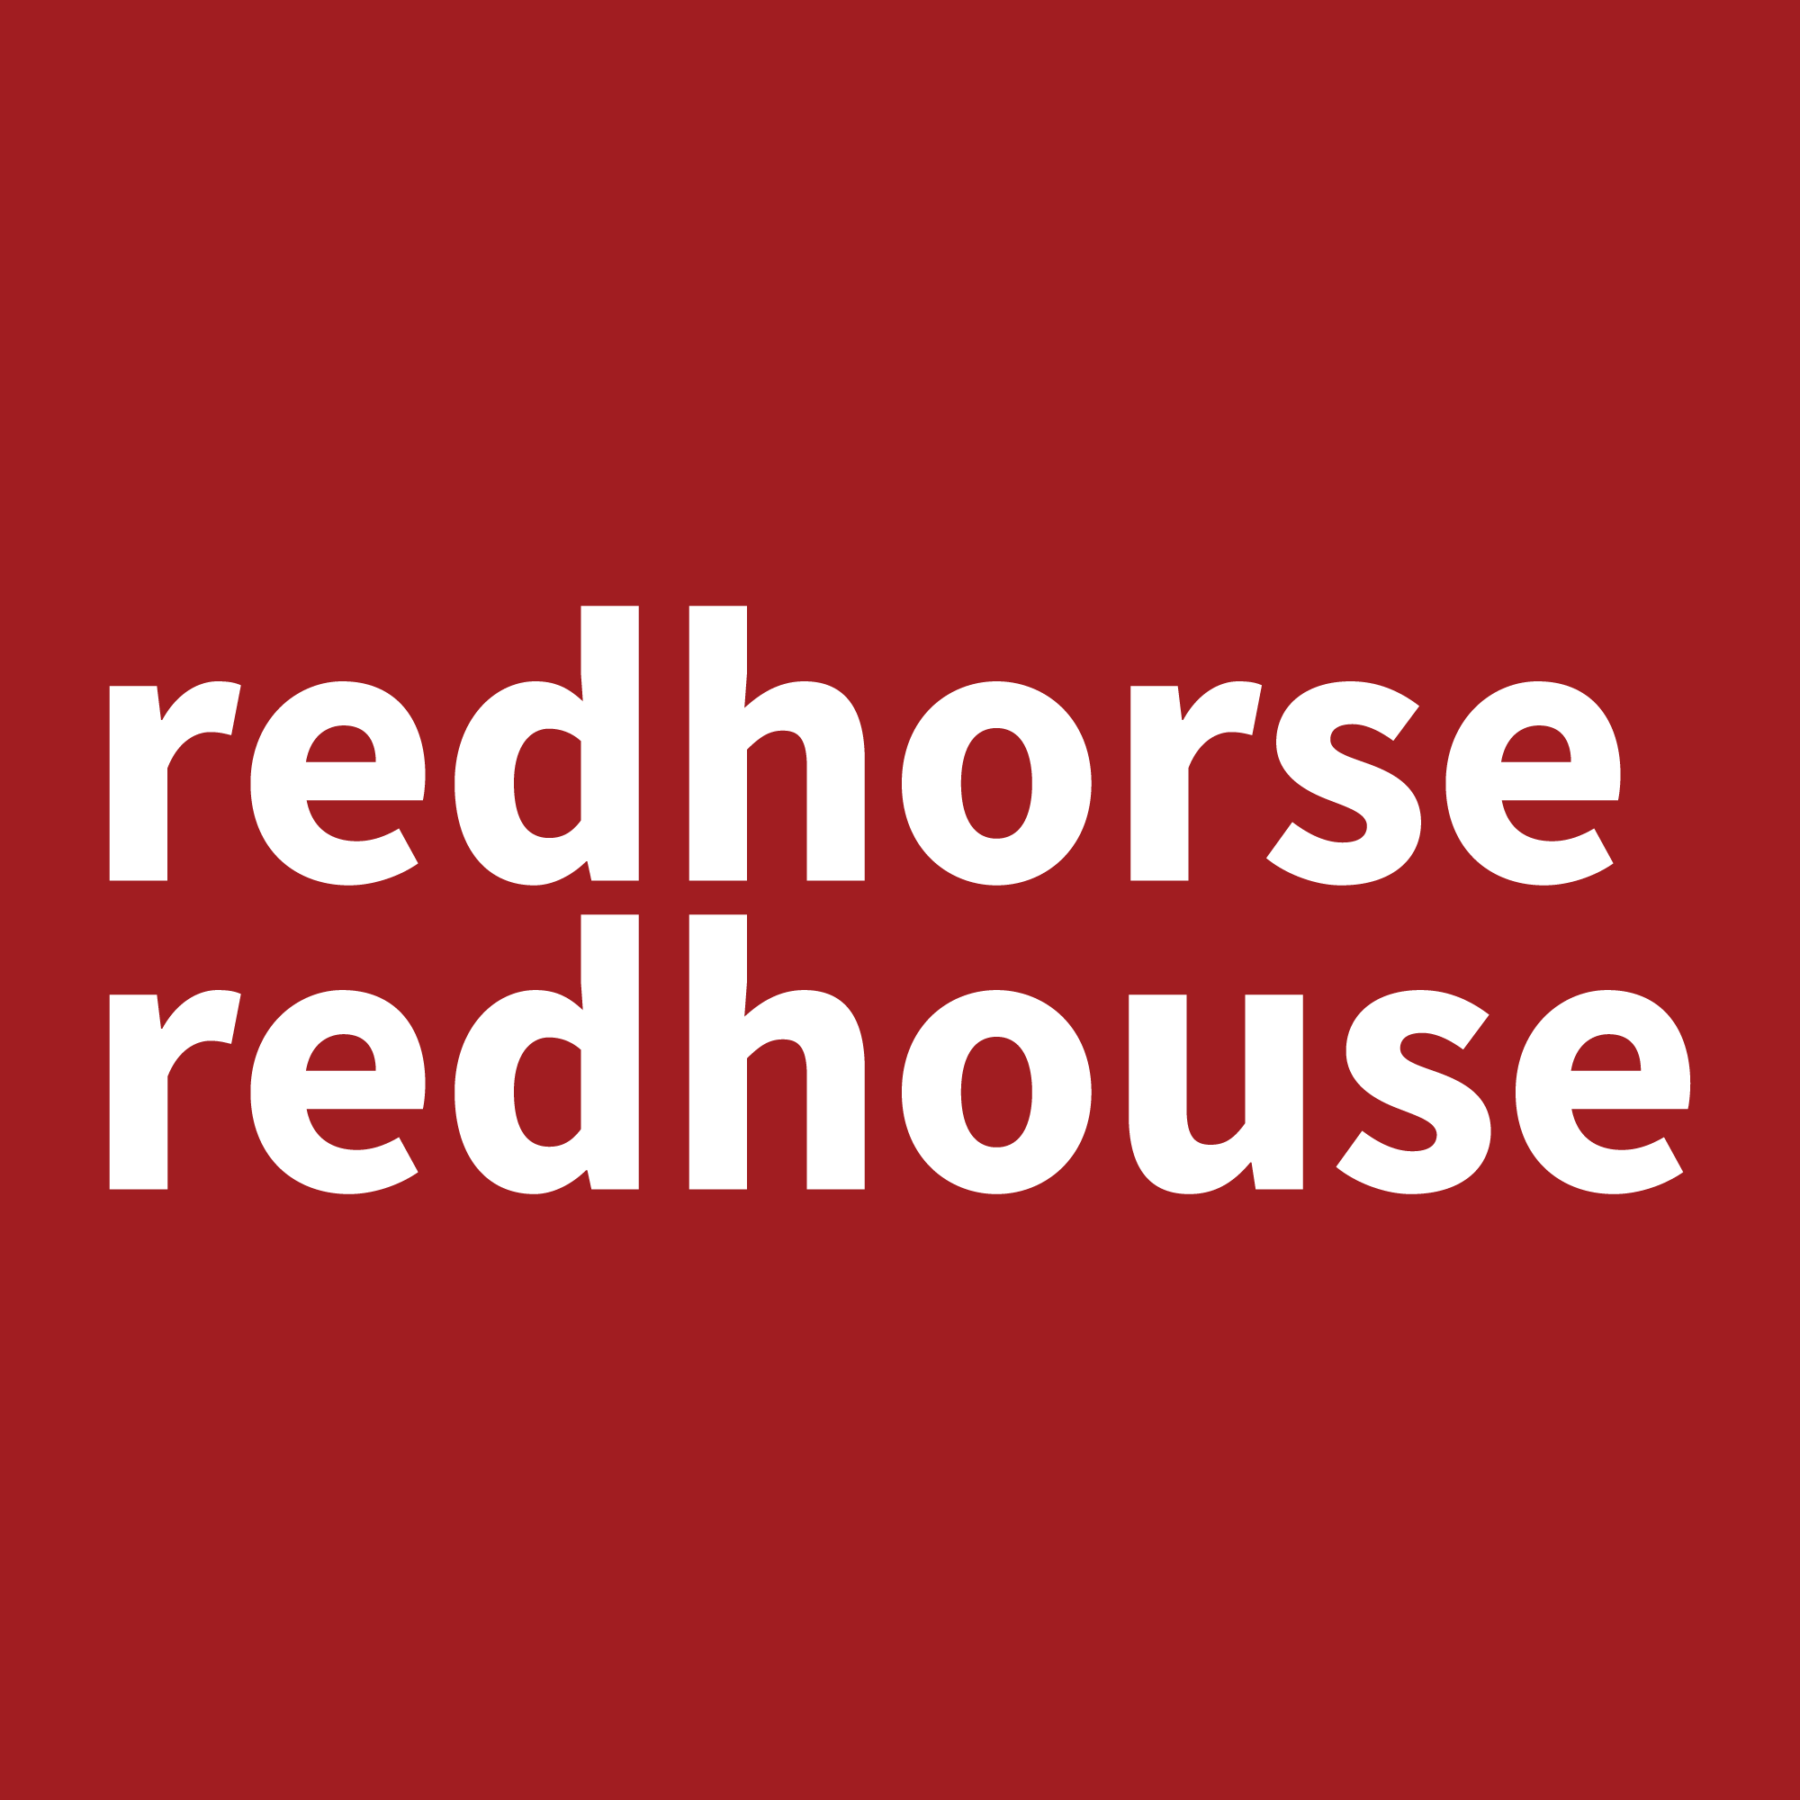 jason-b-graham-category-redhorse-redhouse-featured-image